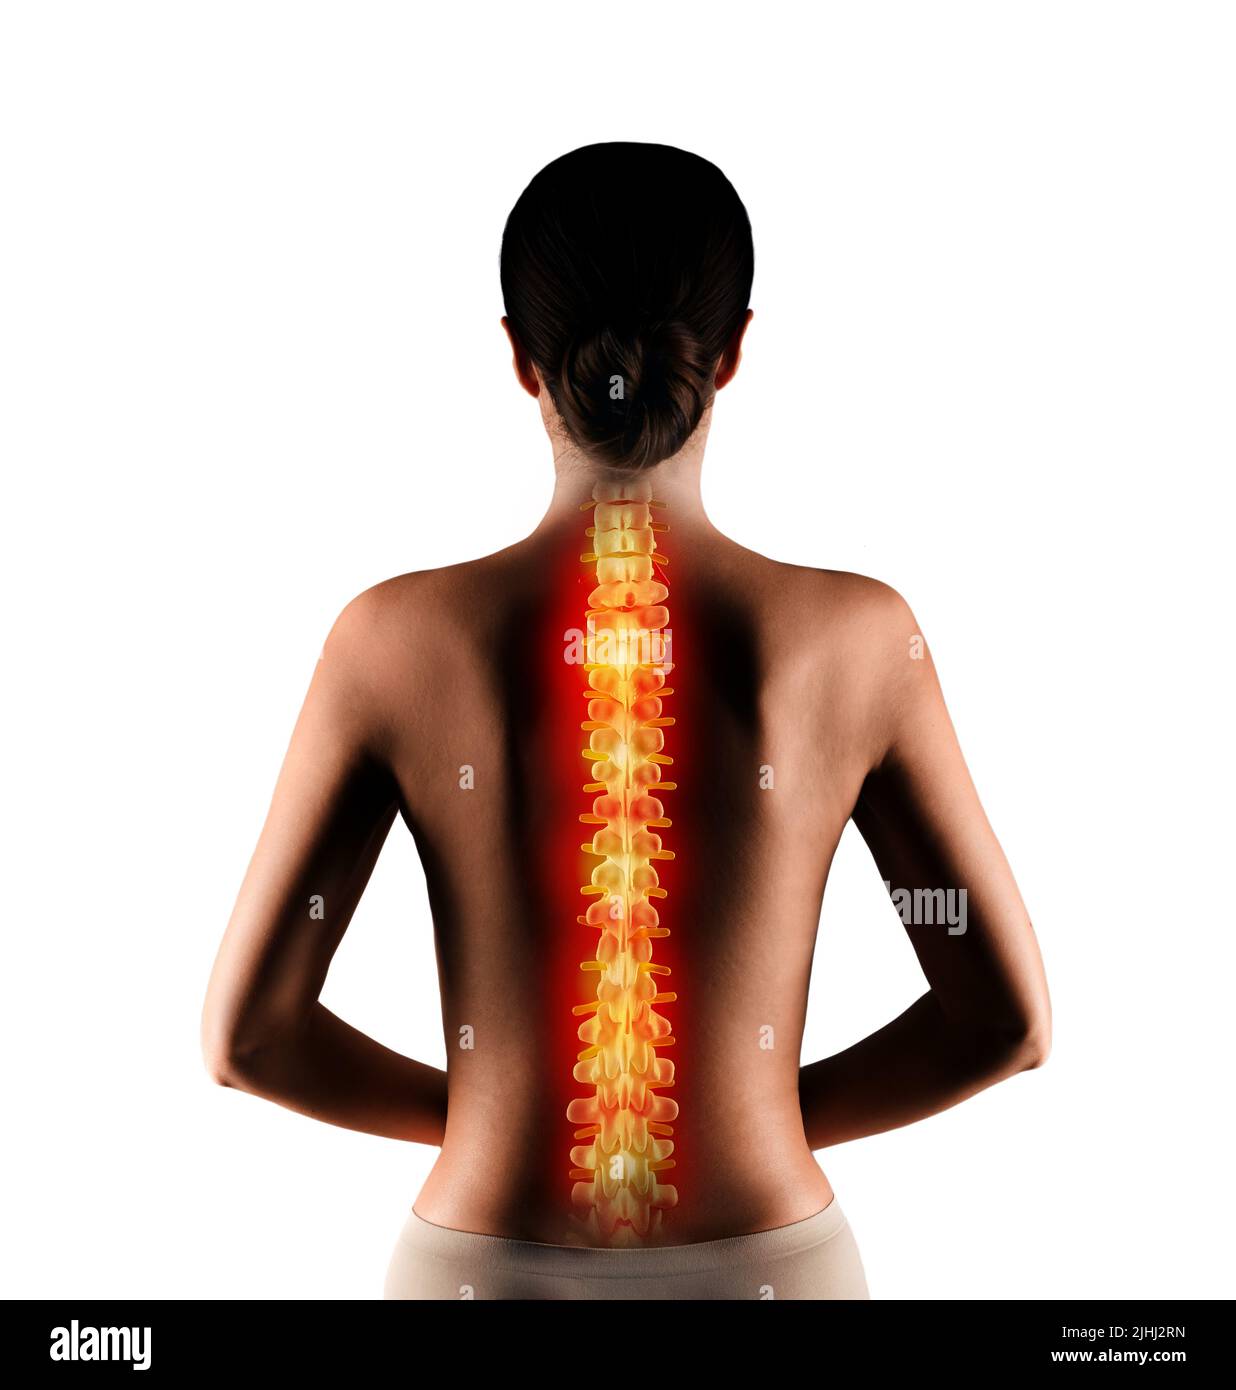 Woman with back pain. Illuminated red spine of woman illustrates backache and back trouble Stock Photo